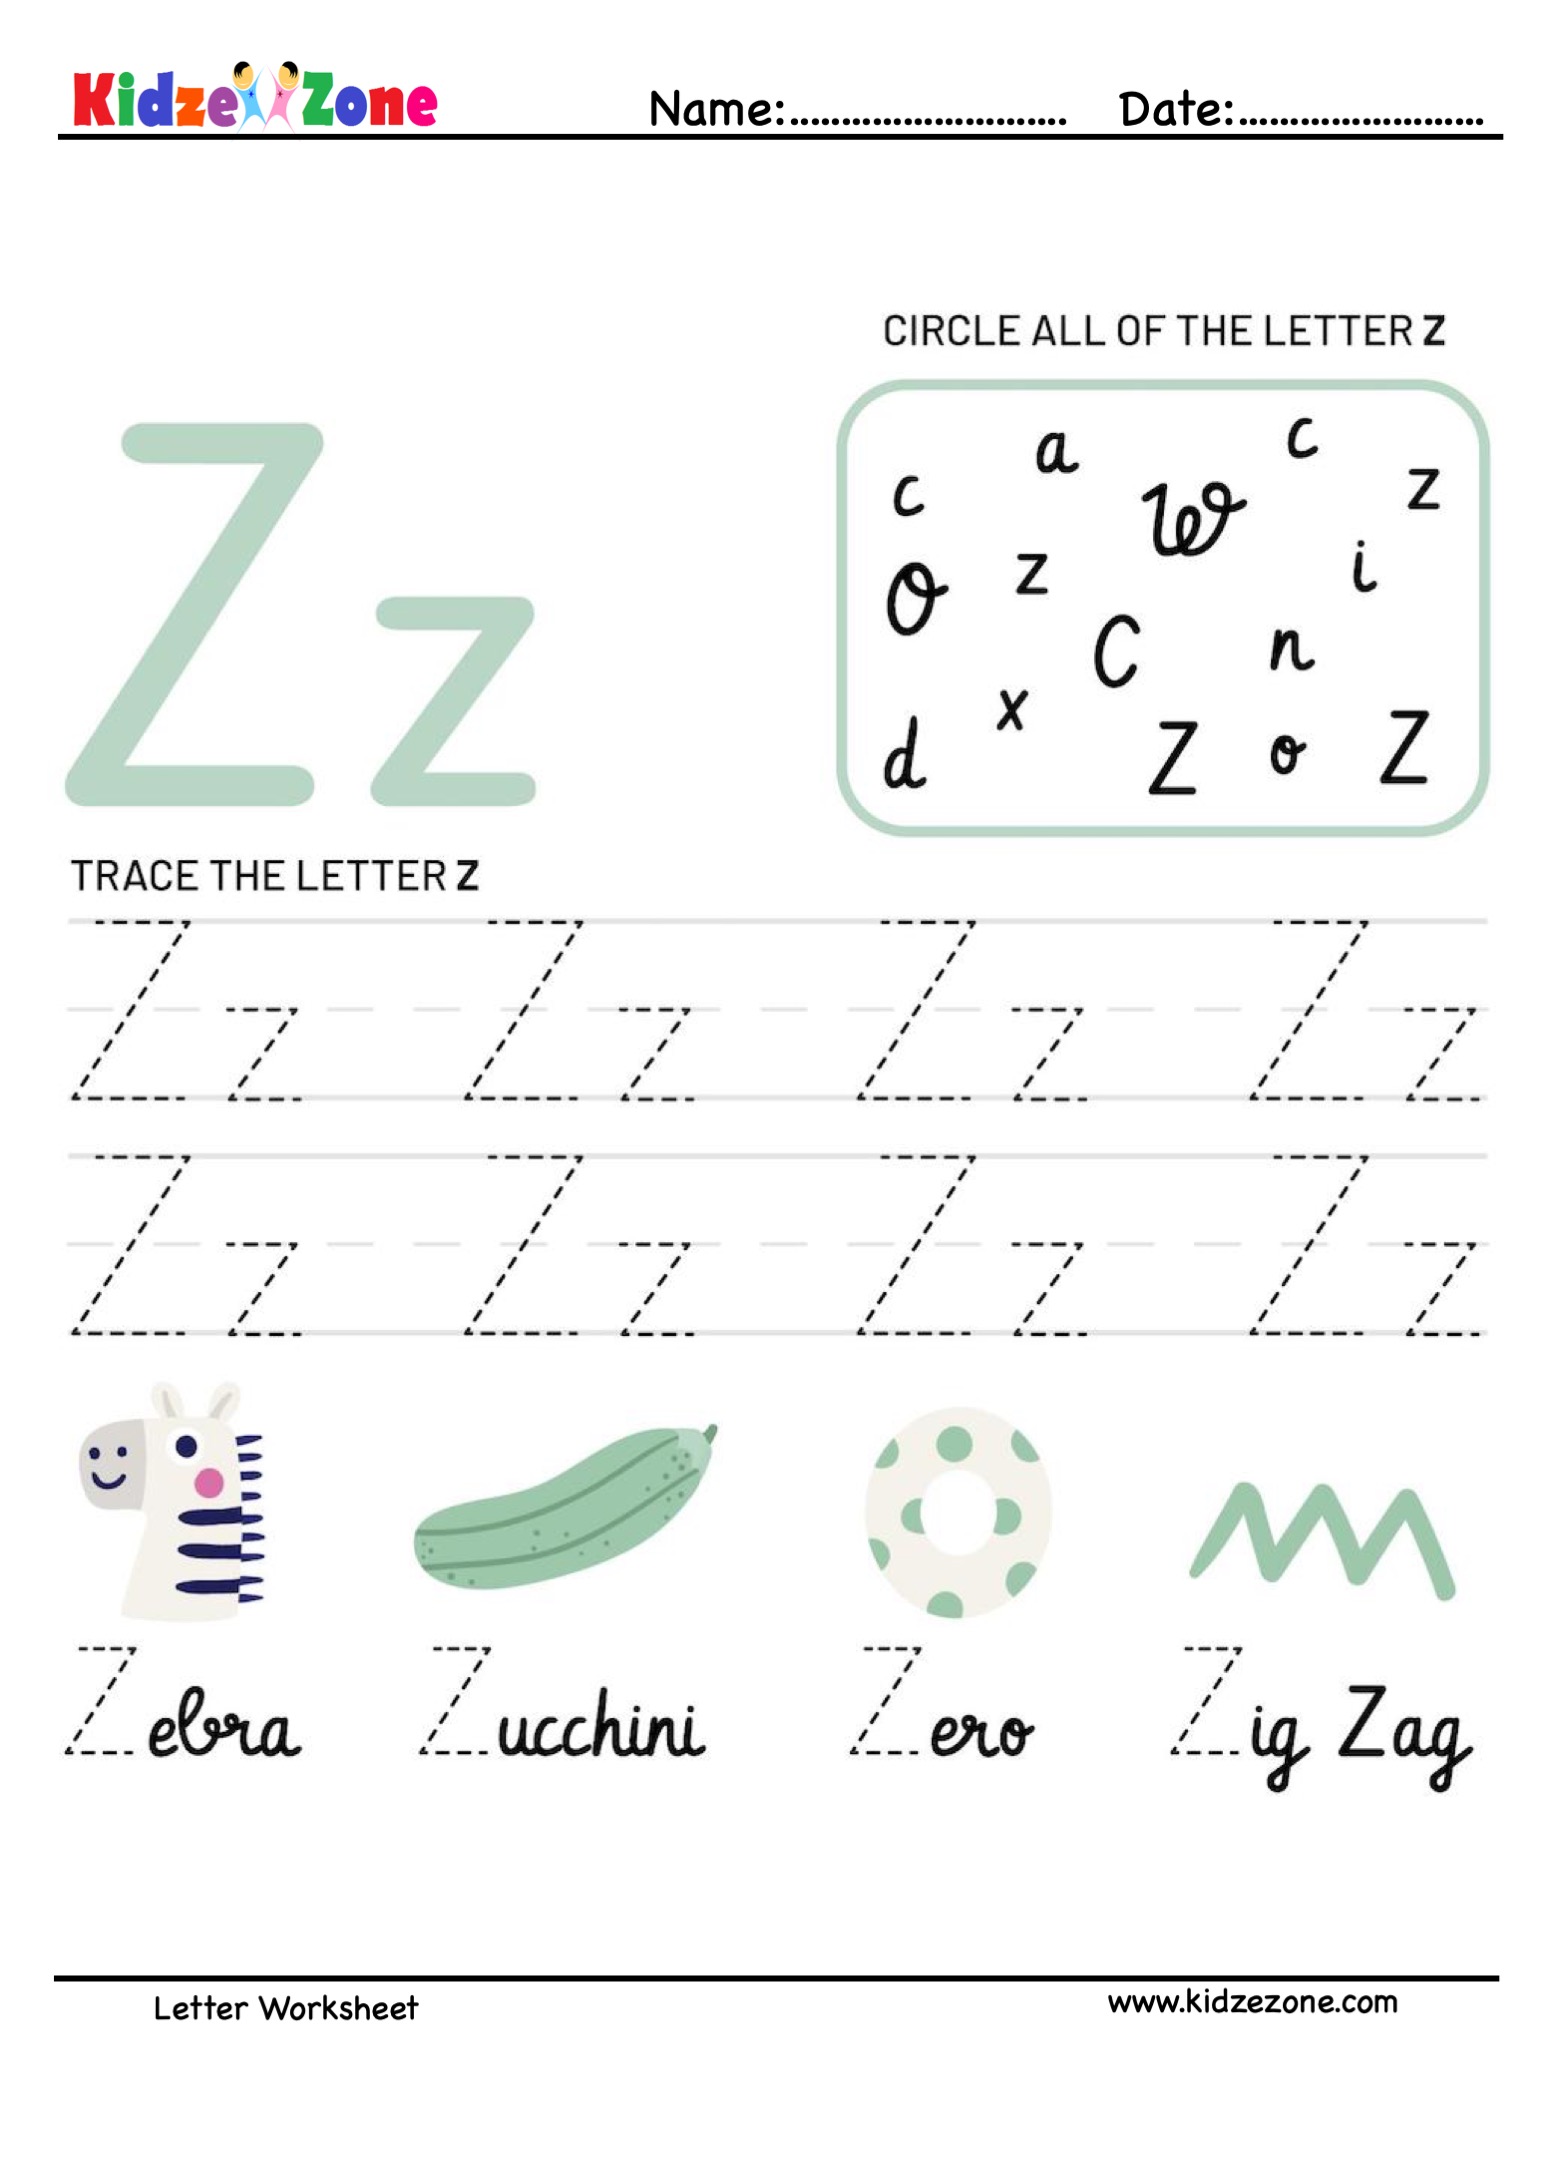 Letter Z Tracing and Fun Worksheet - KidzeZone